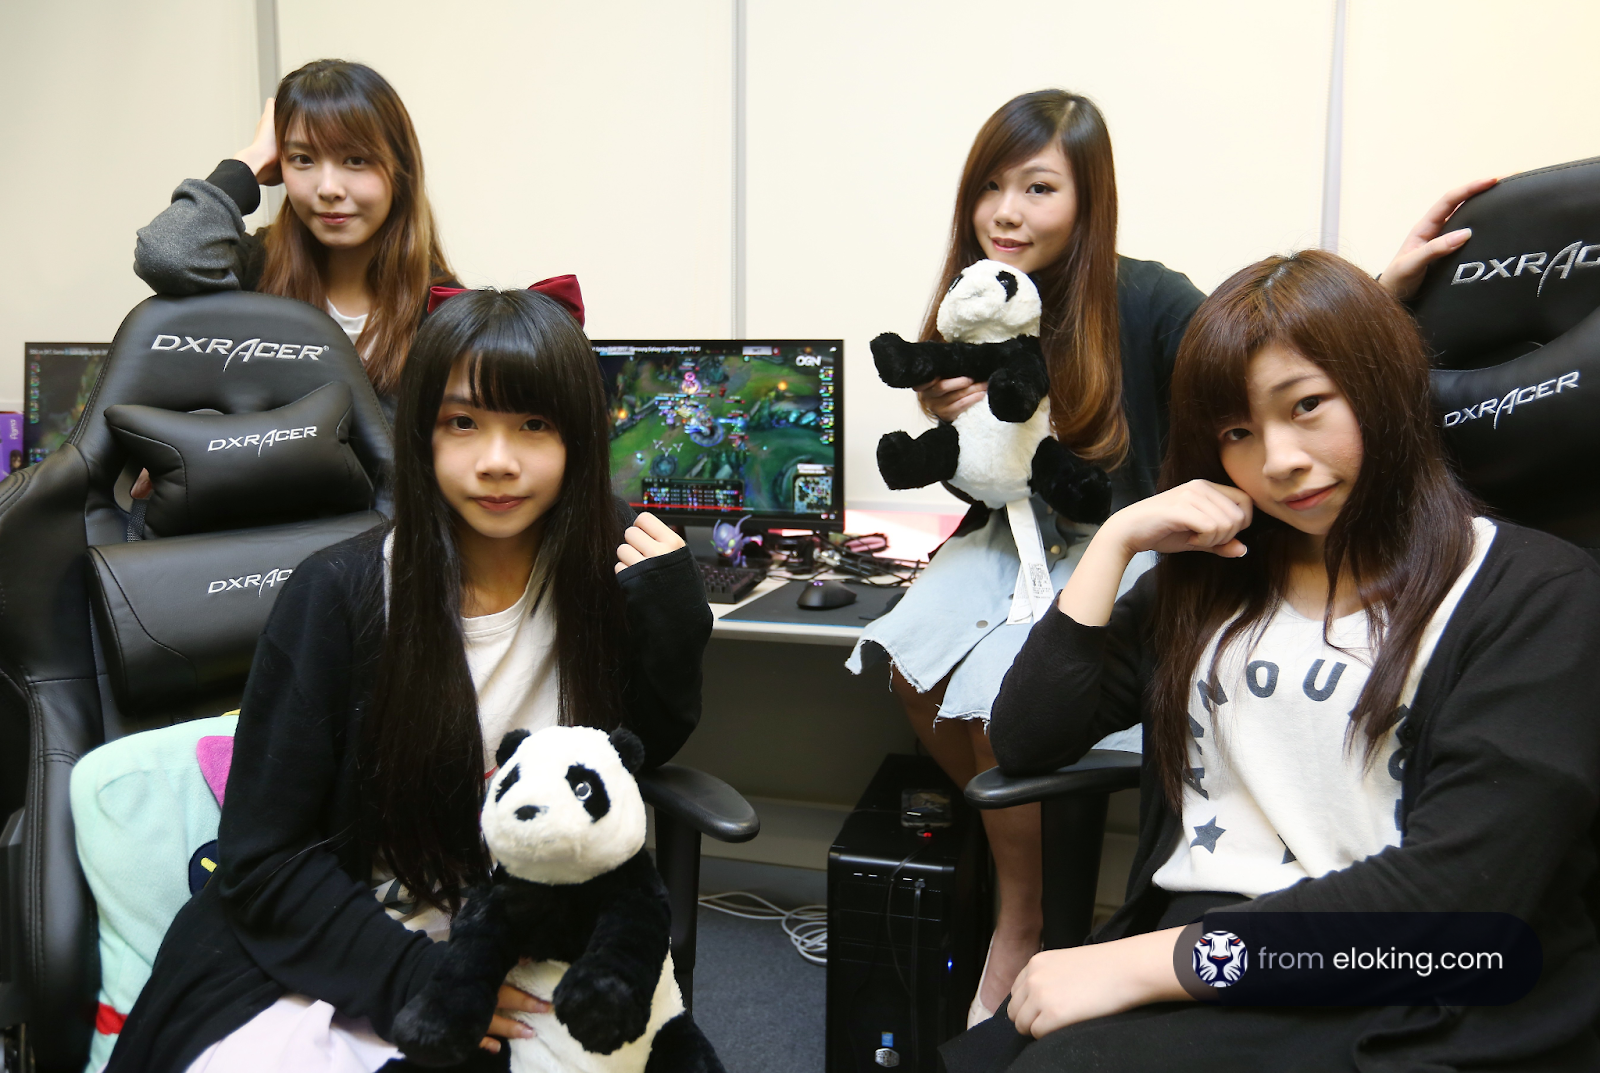 Young women with gaming chairs and stuffed pandas in a gaming room